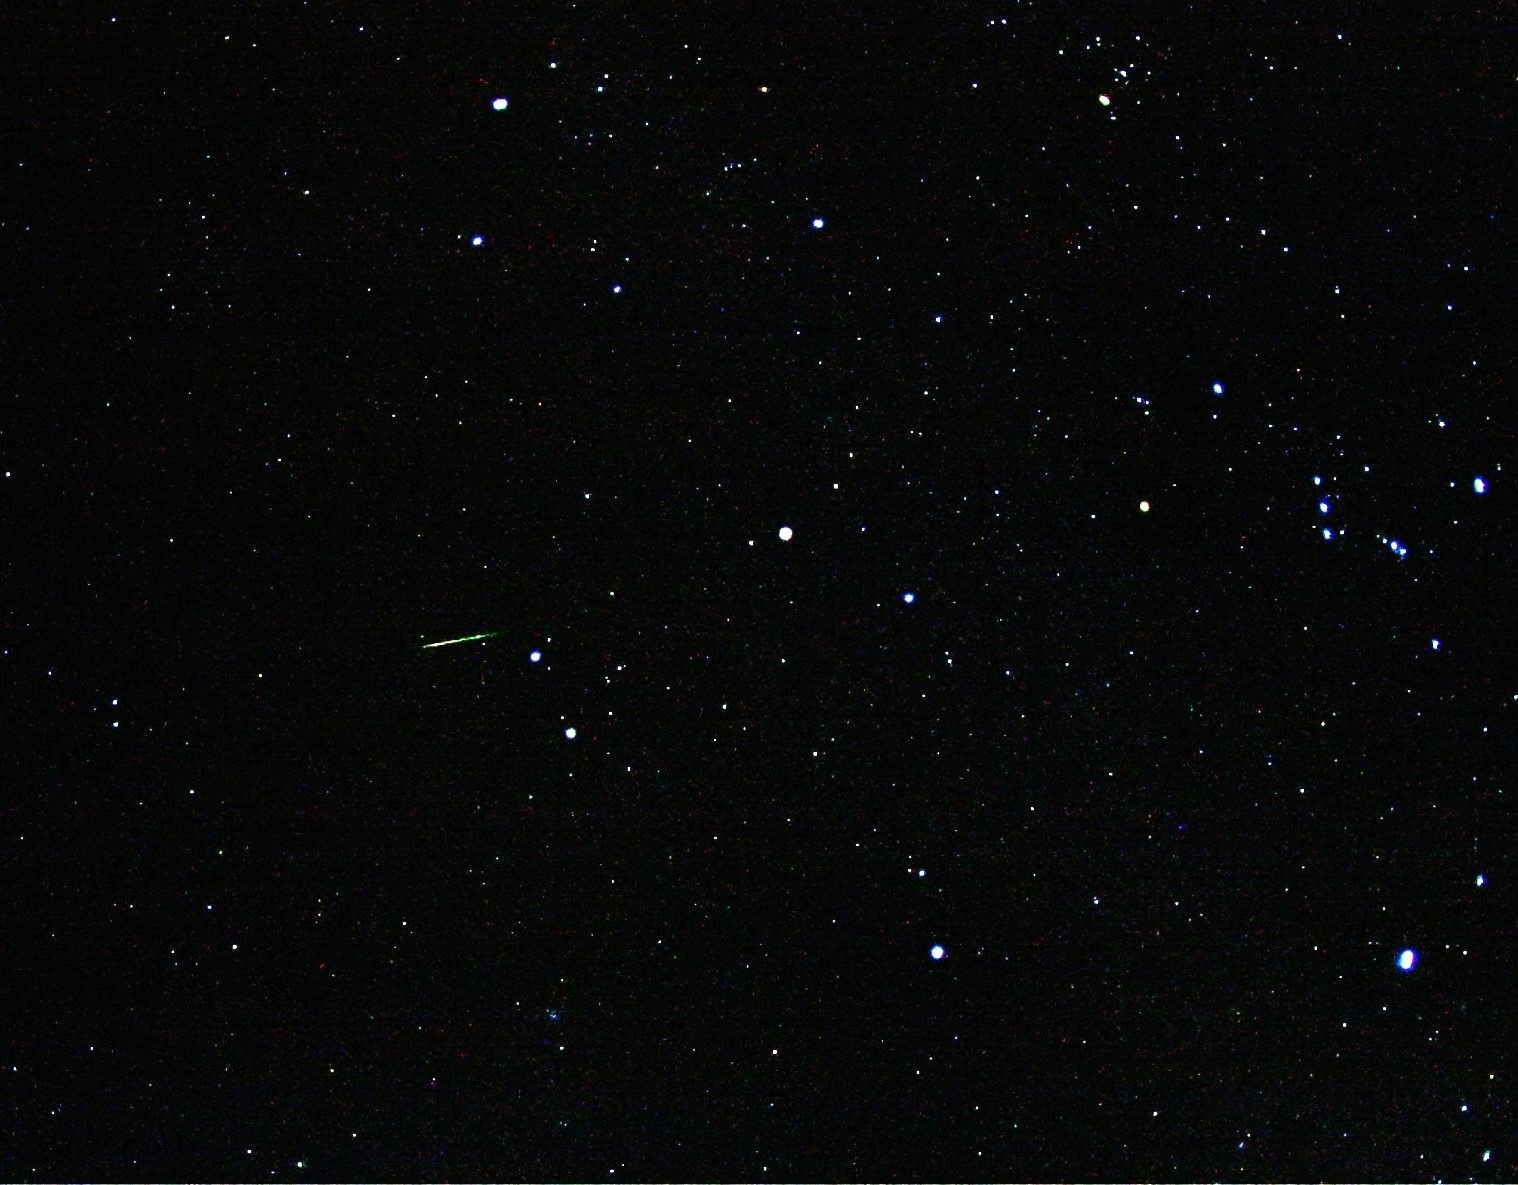 An Orionid to the left.